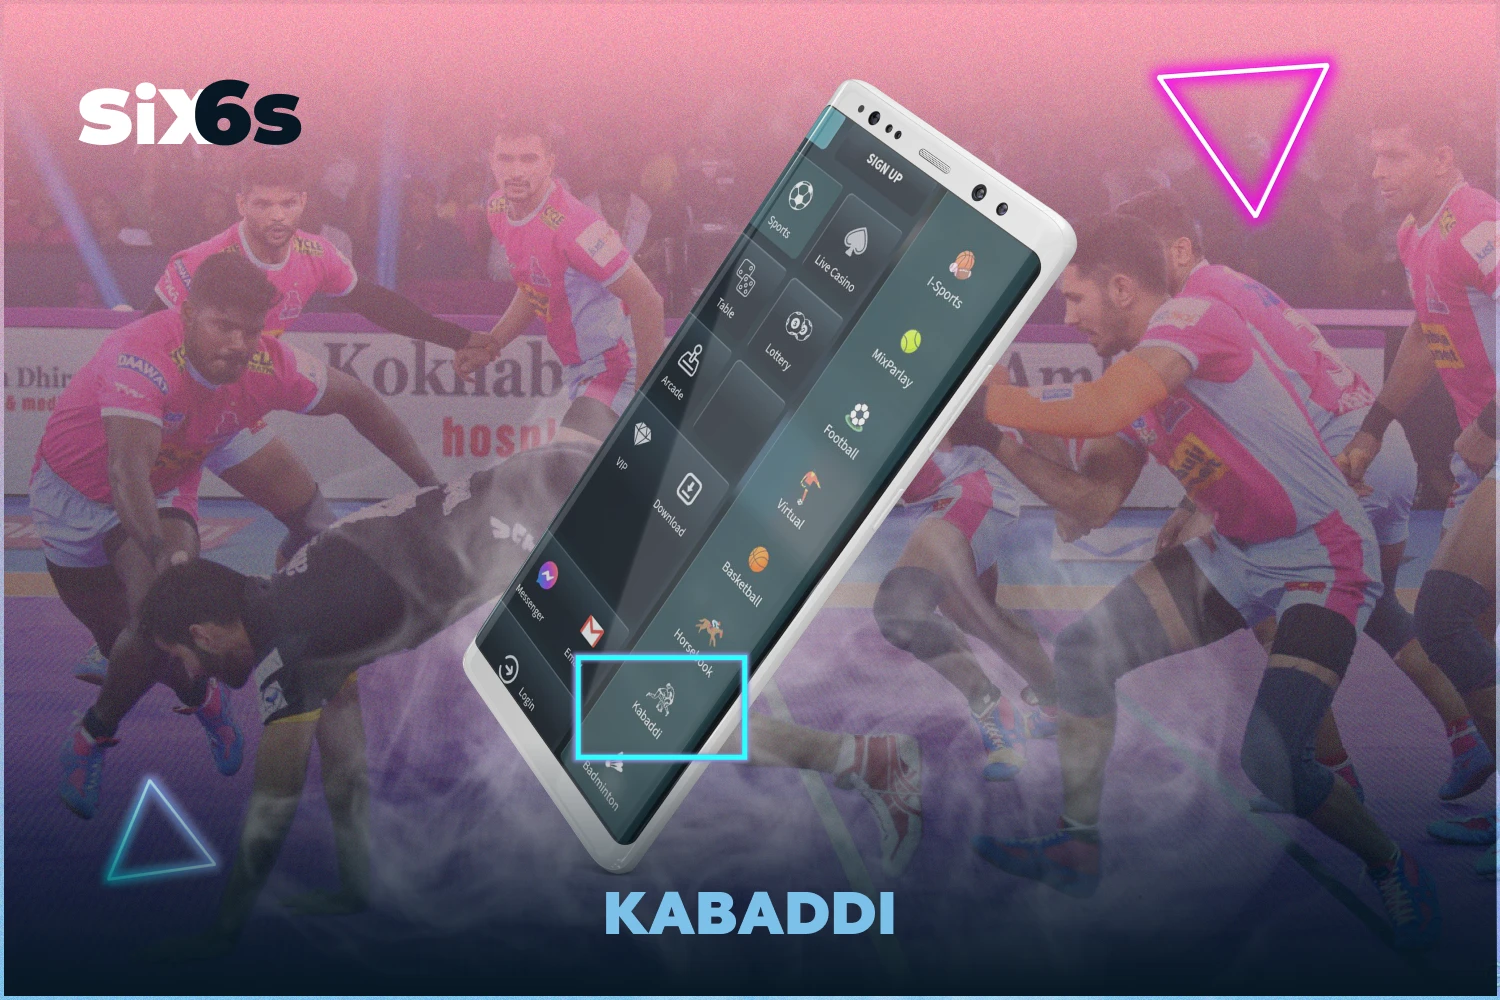 Kabaddi is a very entertaining and interesting sporting discipline and players from Bangladesh can watch matches and bet on popular tournaments on Six6s